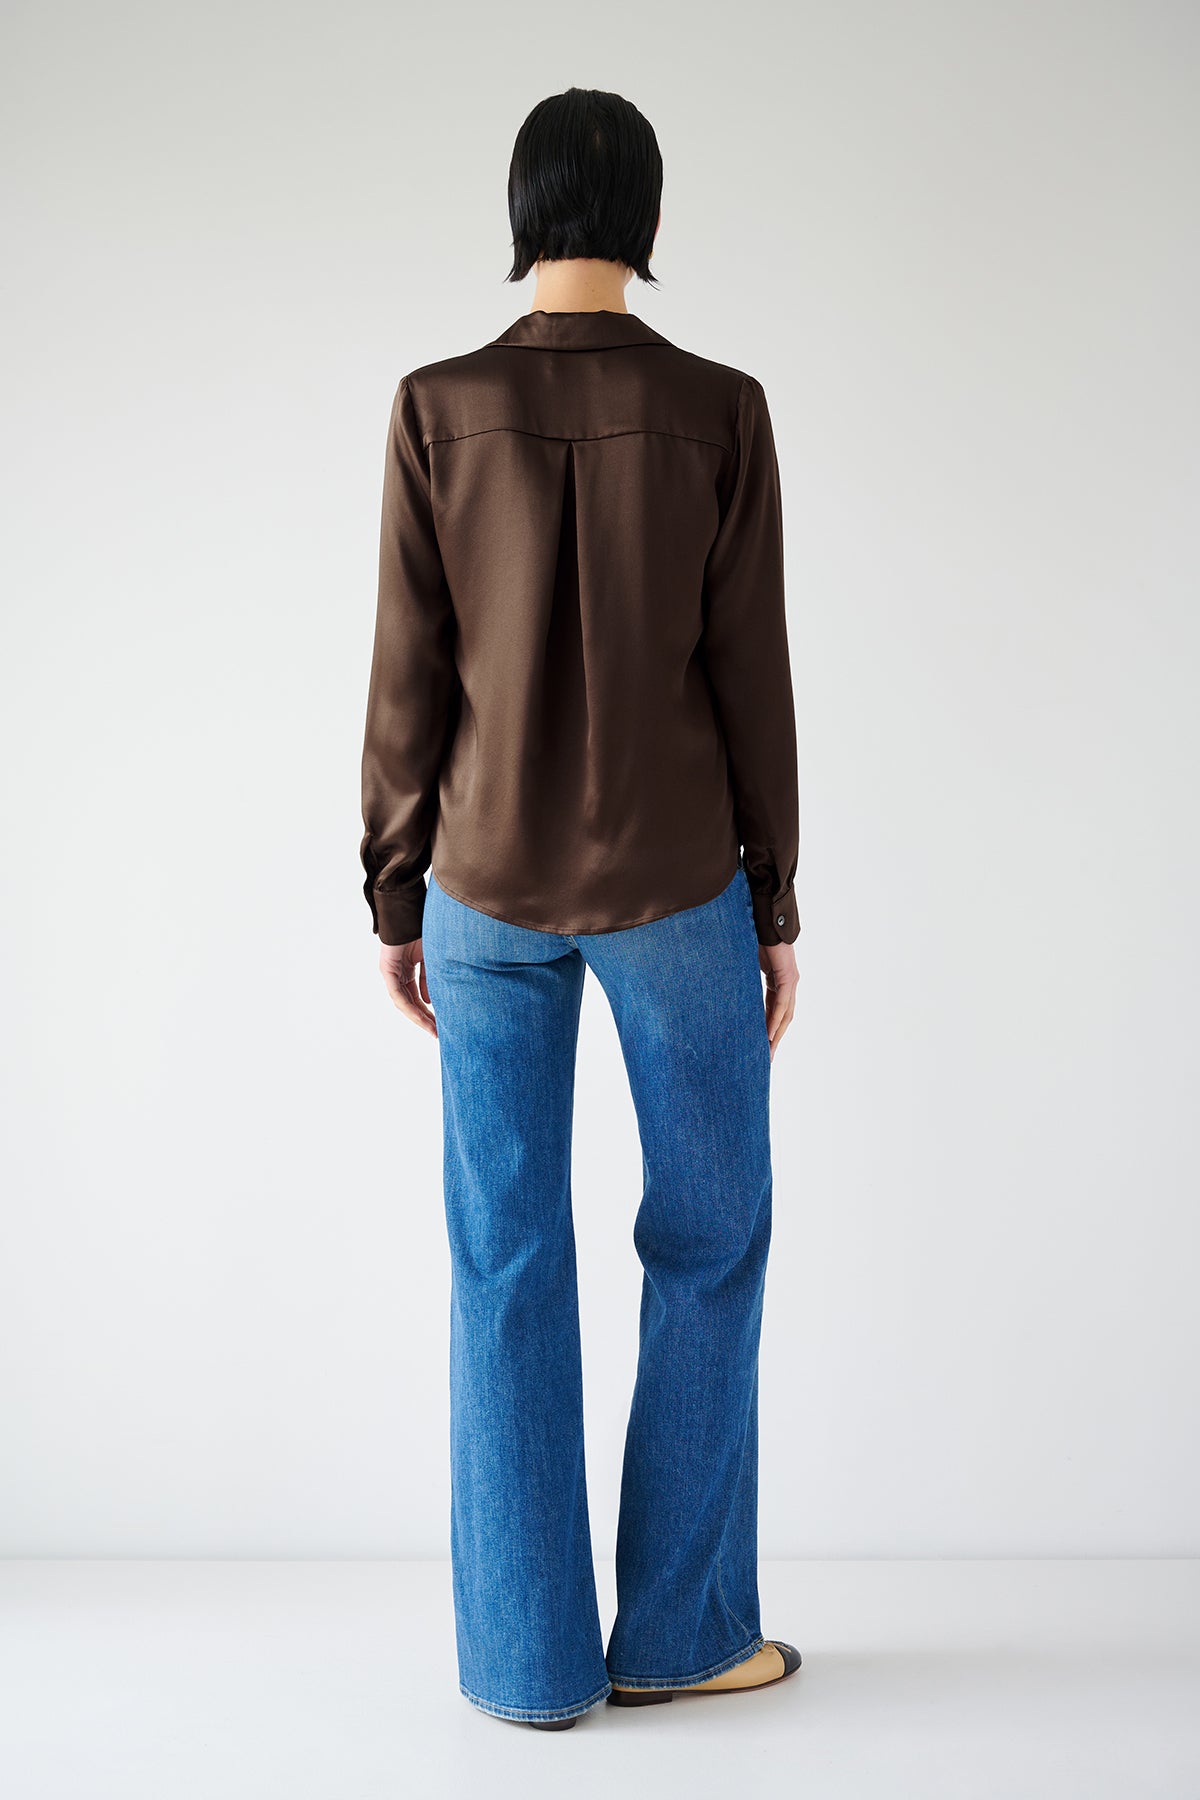 The timeless back view of a woman wearing a Velvet by Jenny Graham SOHO TOP in silk charmeuse.-35547448836289